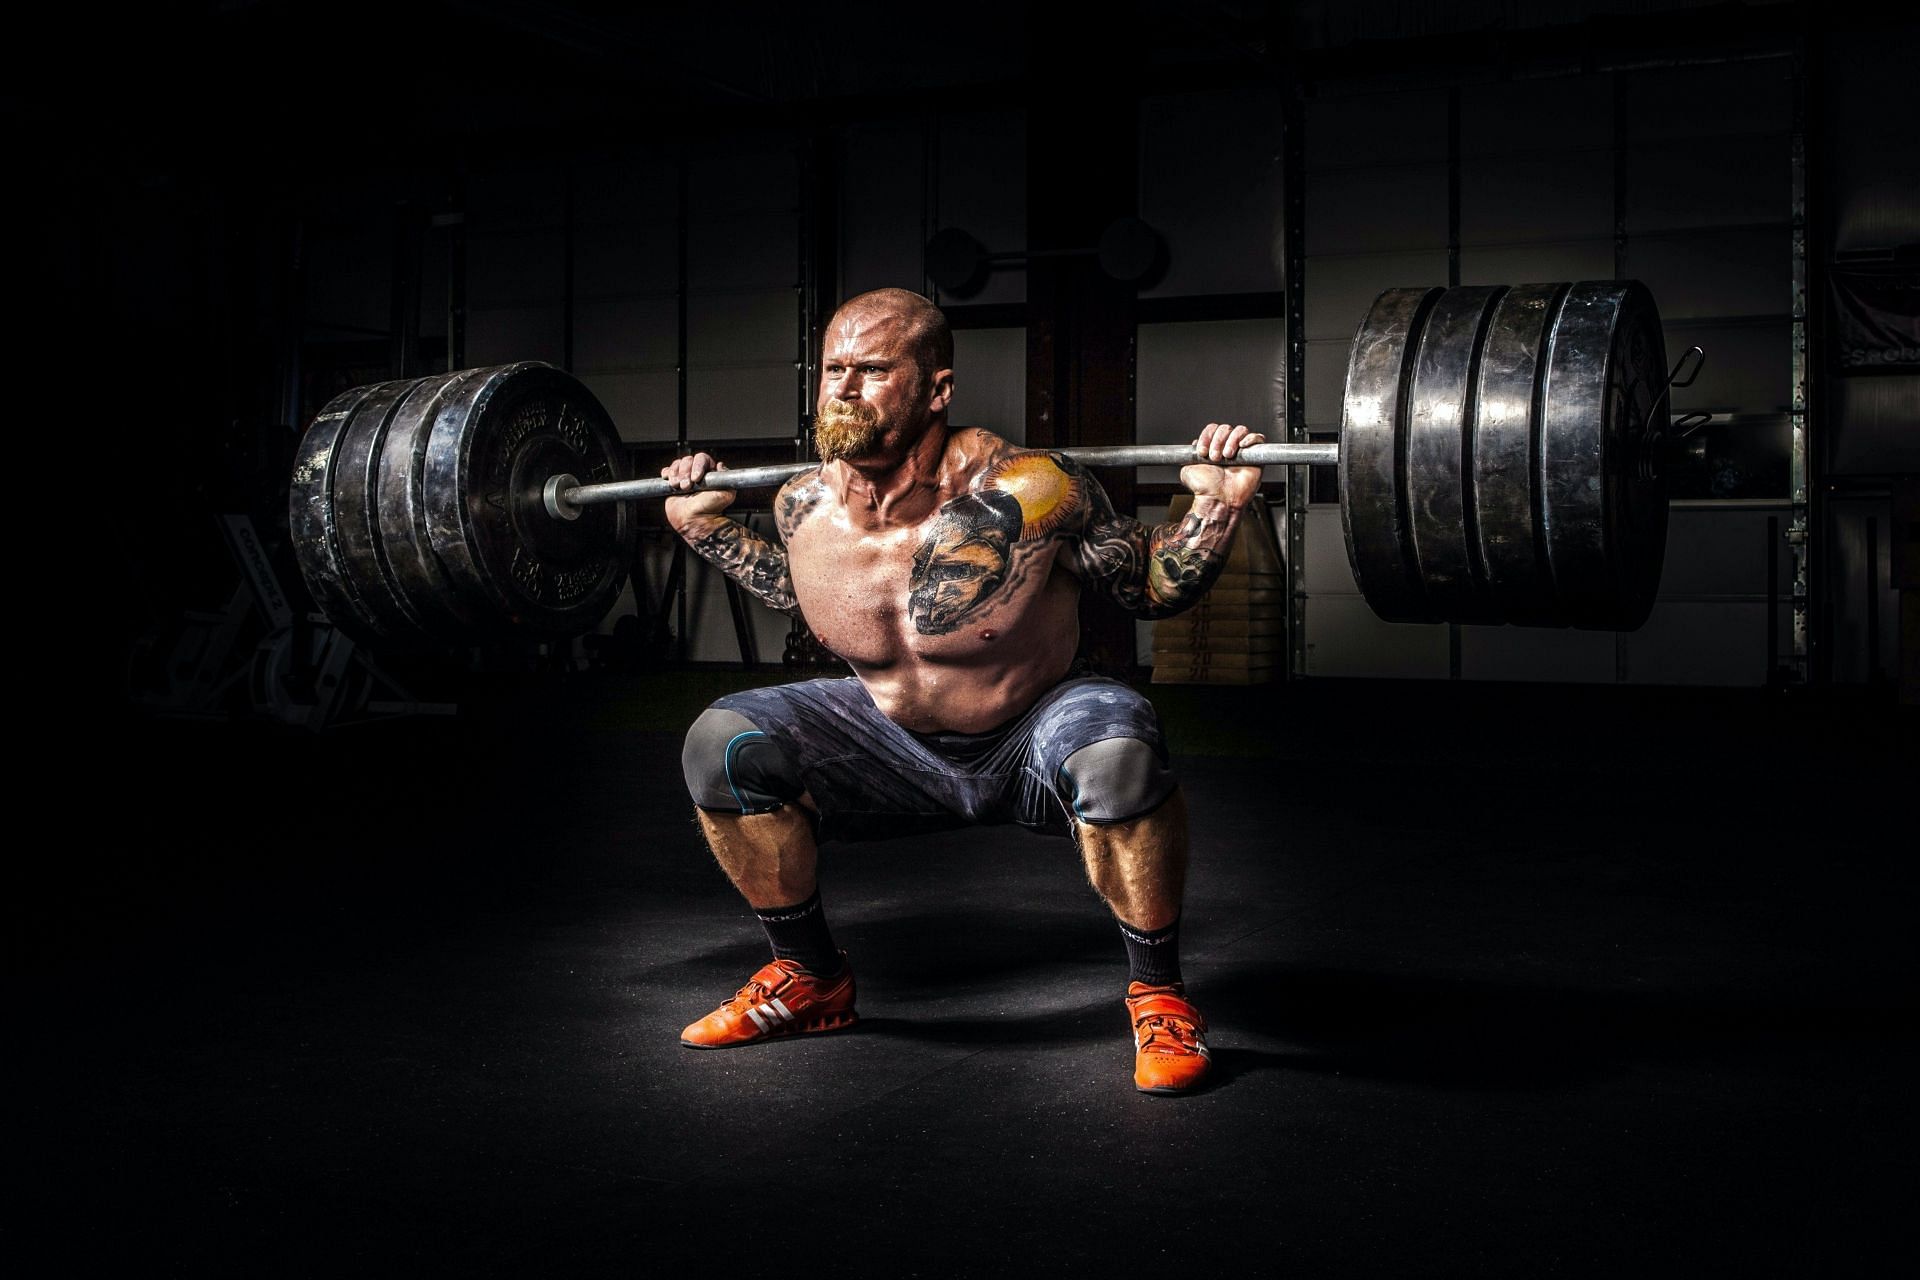 Squats are one of the best ways of weightlifting for weight loss because they engage multiple muscle groups, including your quads, hamstrings, glutes, and core (Photo by Binyamin Mellish/pexels)